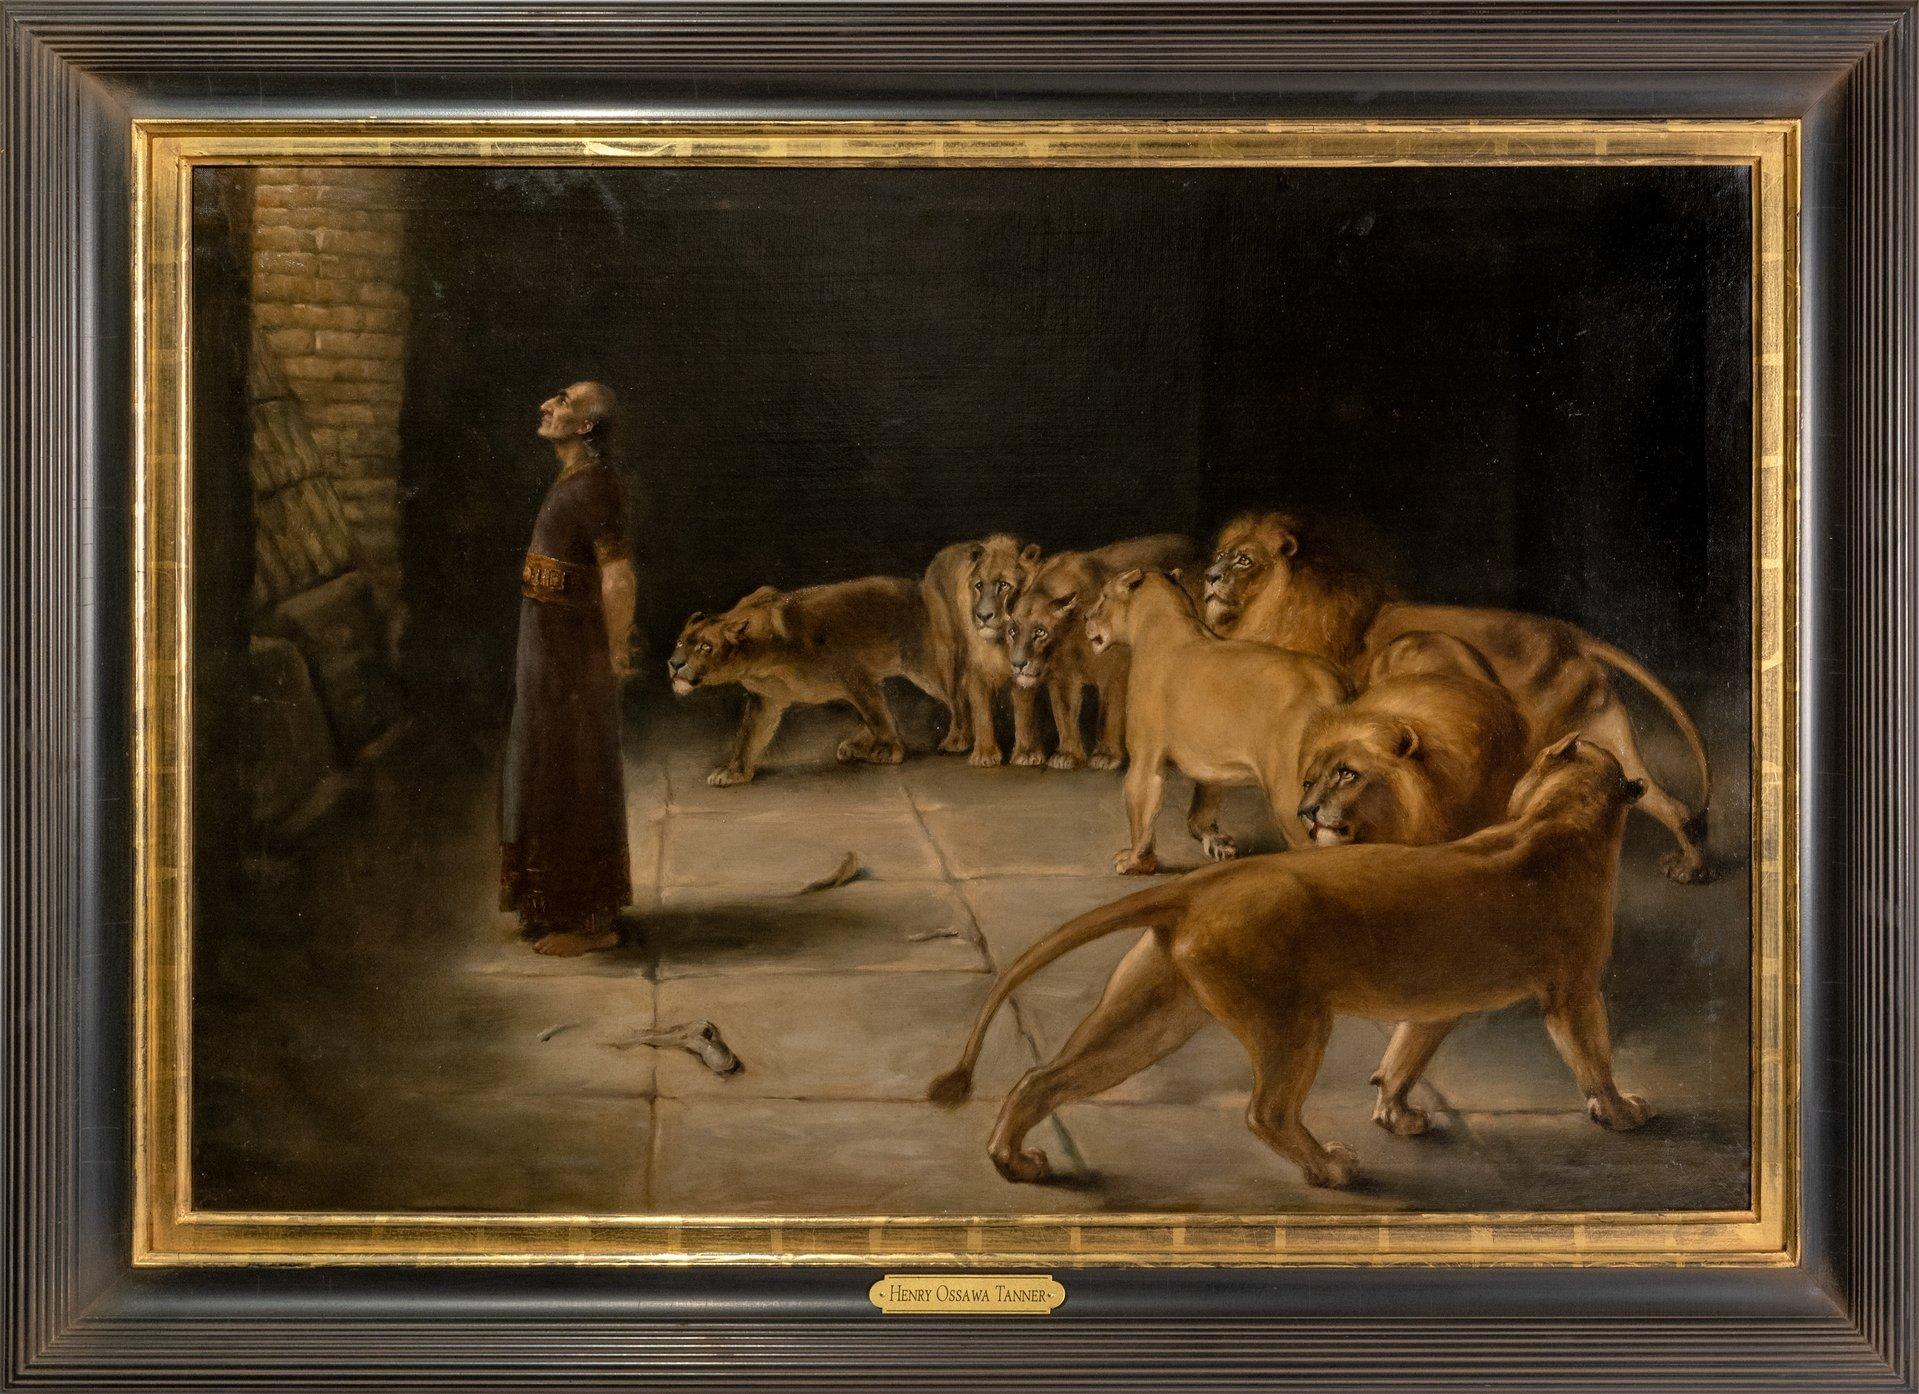 DANIEL IN THE LIONS' DEN BY HENRY OSSAWA TANNER after Briton Riviere - Painting by Henry Ossawa Tanner